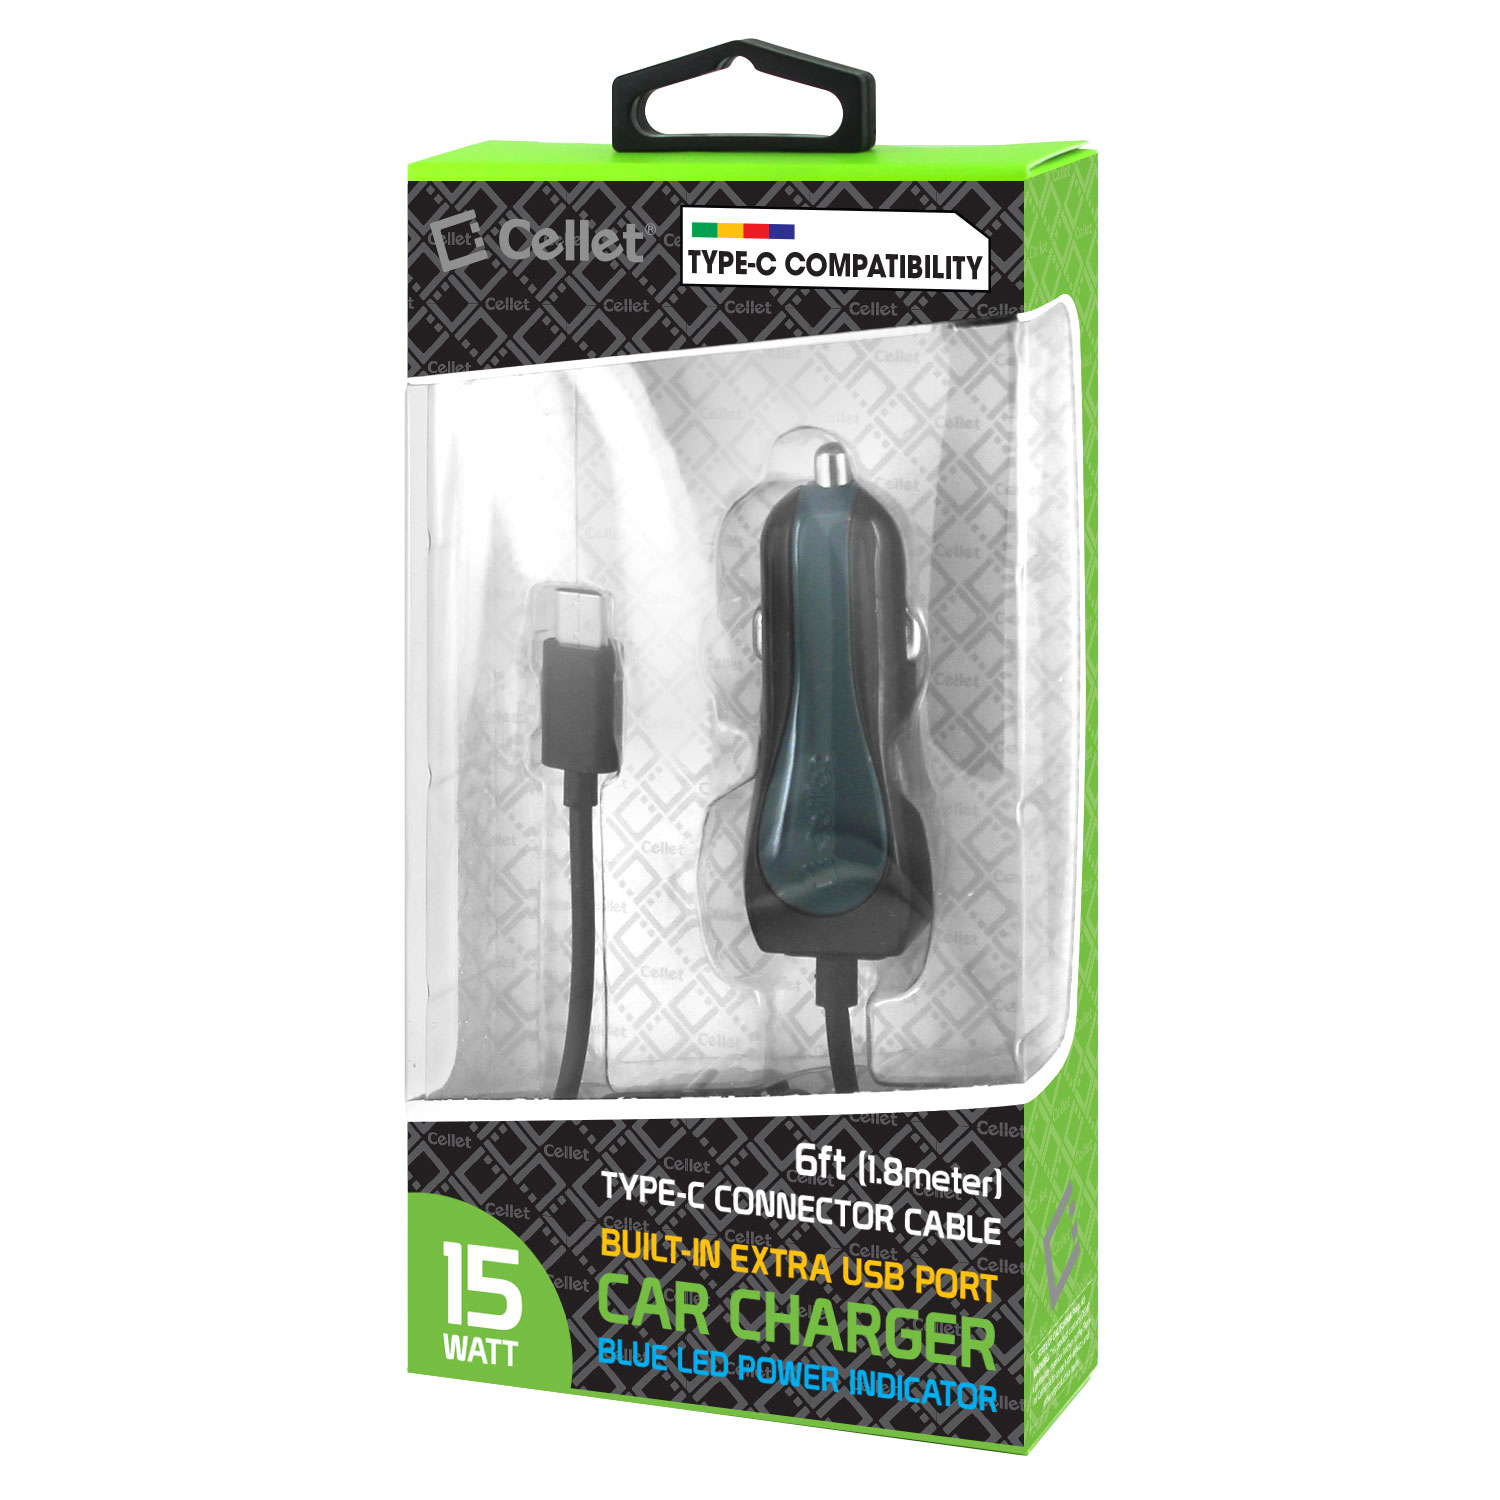 Samsung Galaxy S9 / S9+ Plus Type C Car Charger - [15 Watt / 3 Amp] High Powered USB Type-C (USB-C) Car Charger with Extra USB Port [6 feet] and Atom Cloth for Samsung Galaxy S9 / S9+ Plus - image 4 of 9